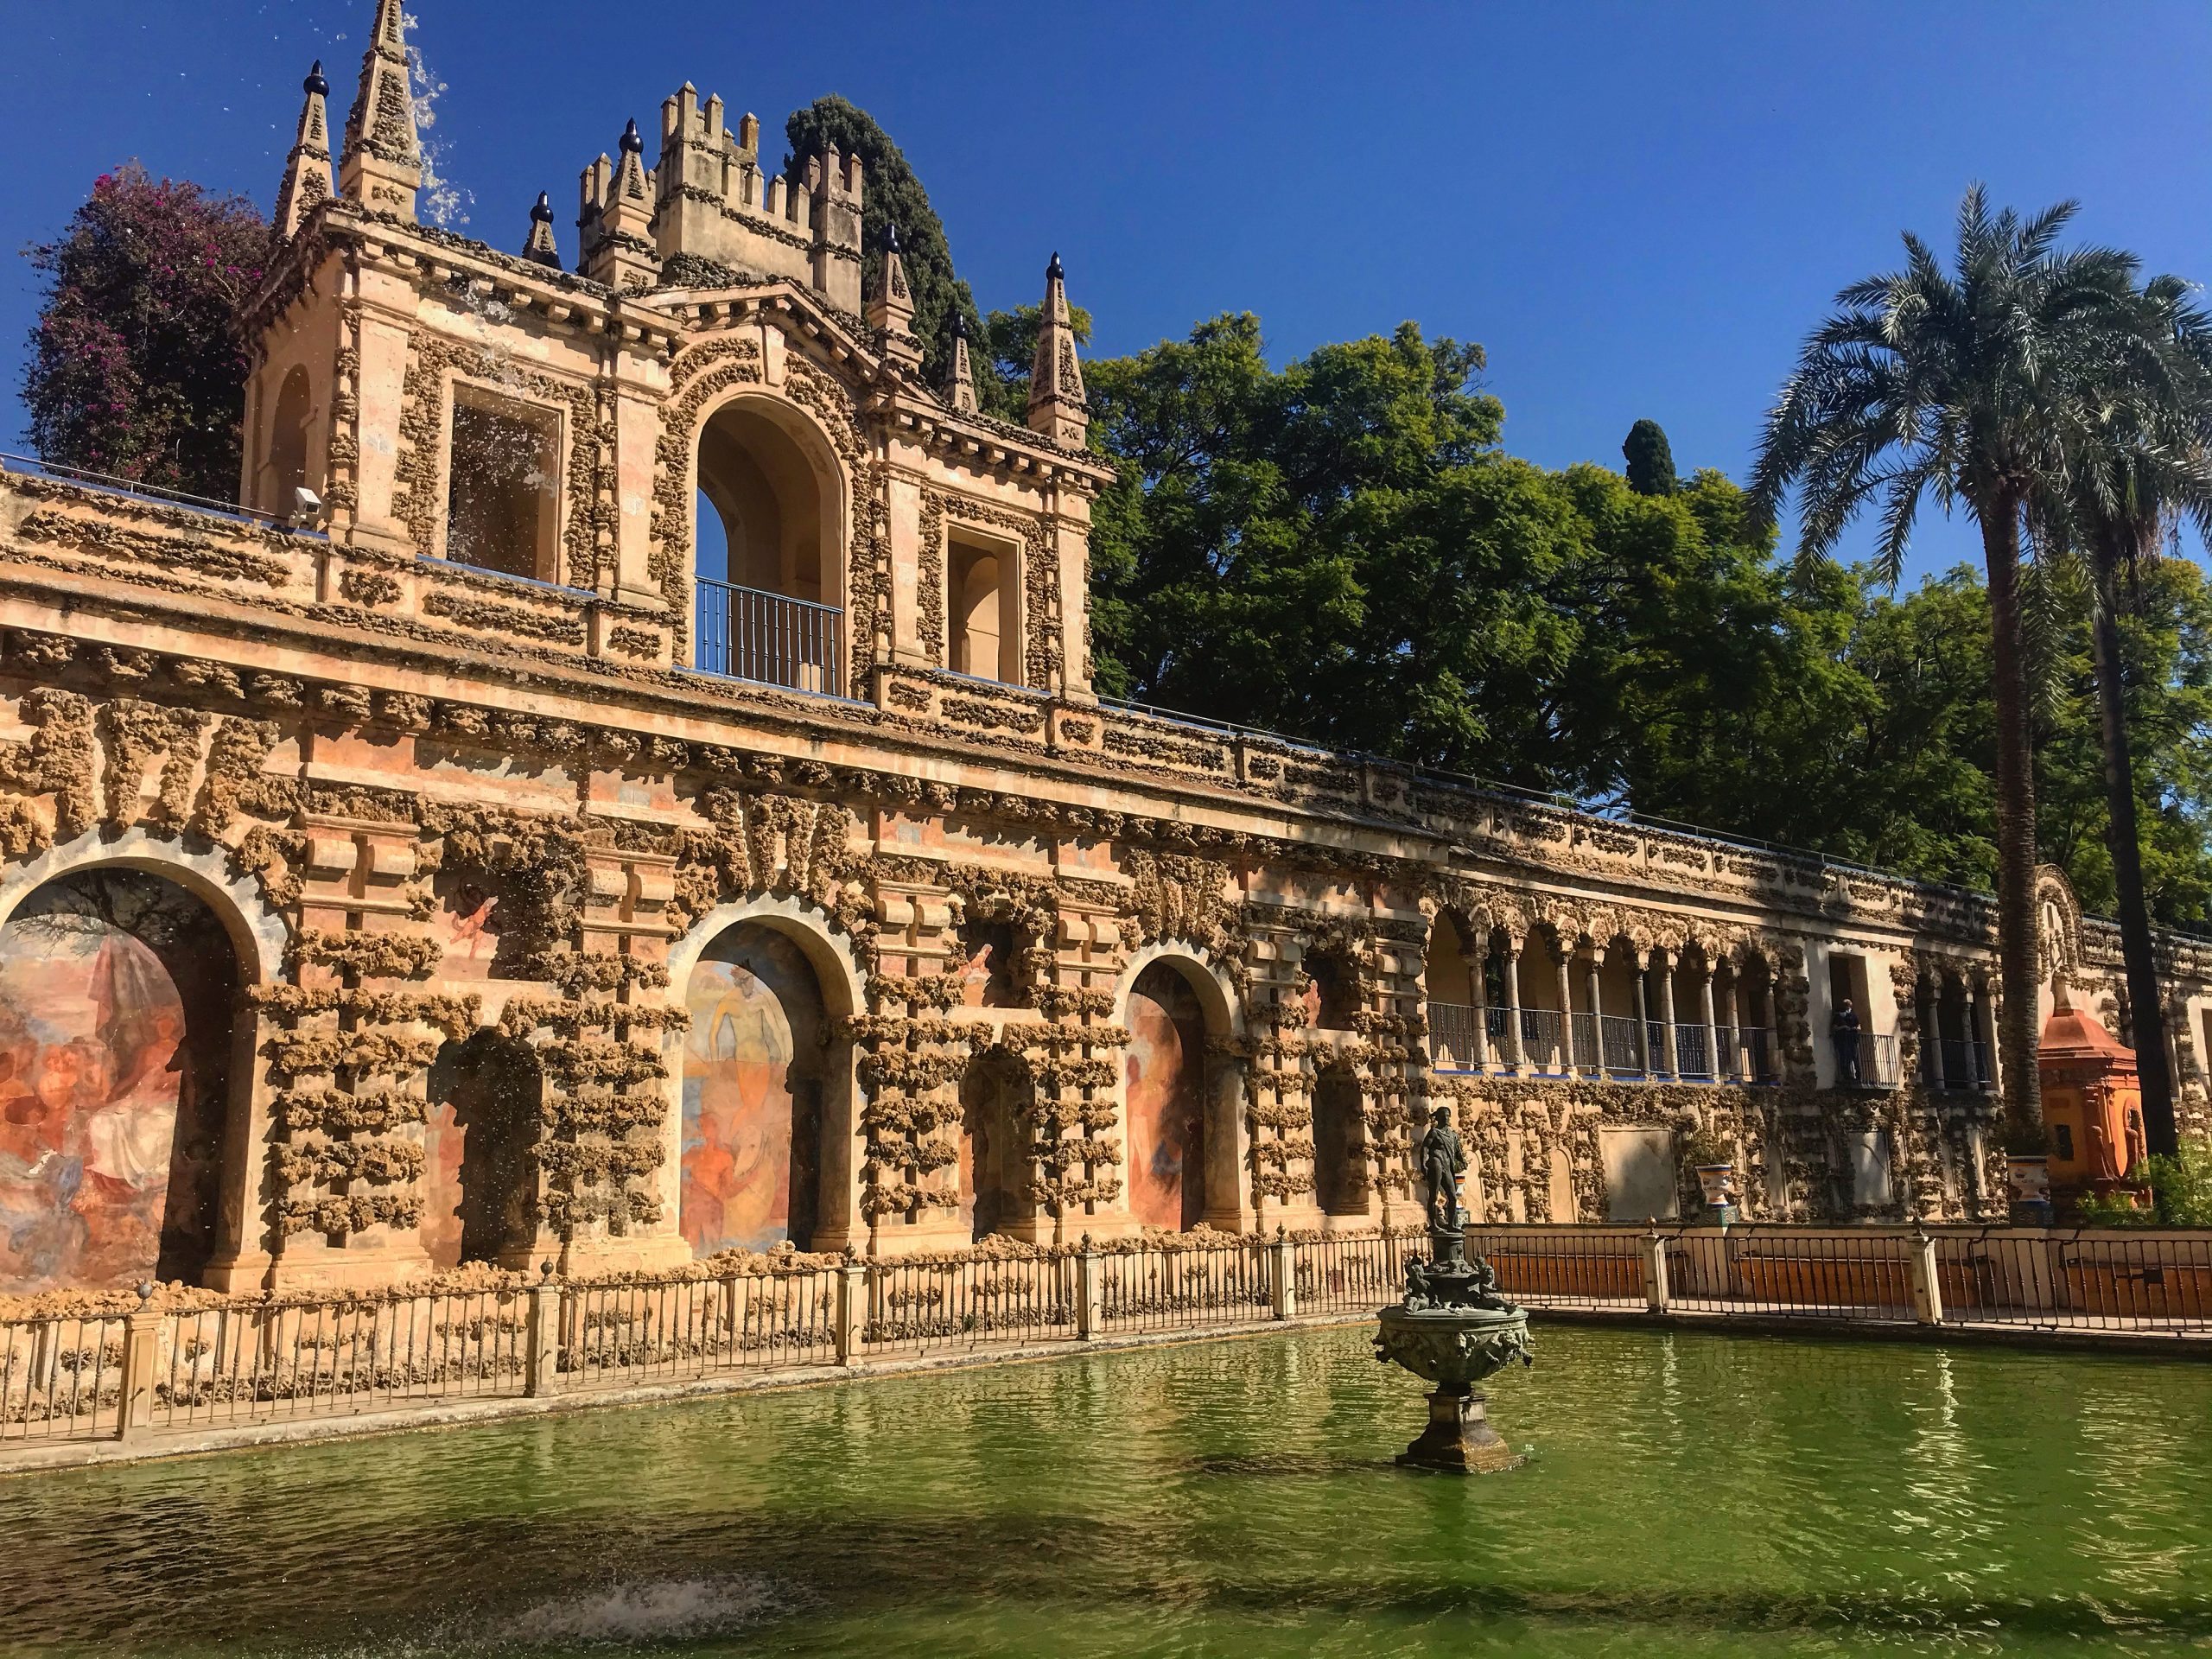 Game of Thrones locations in Seville